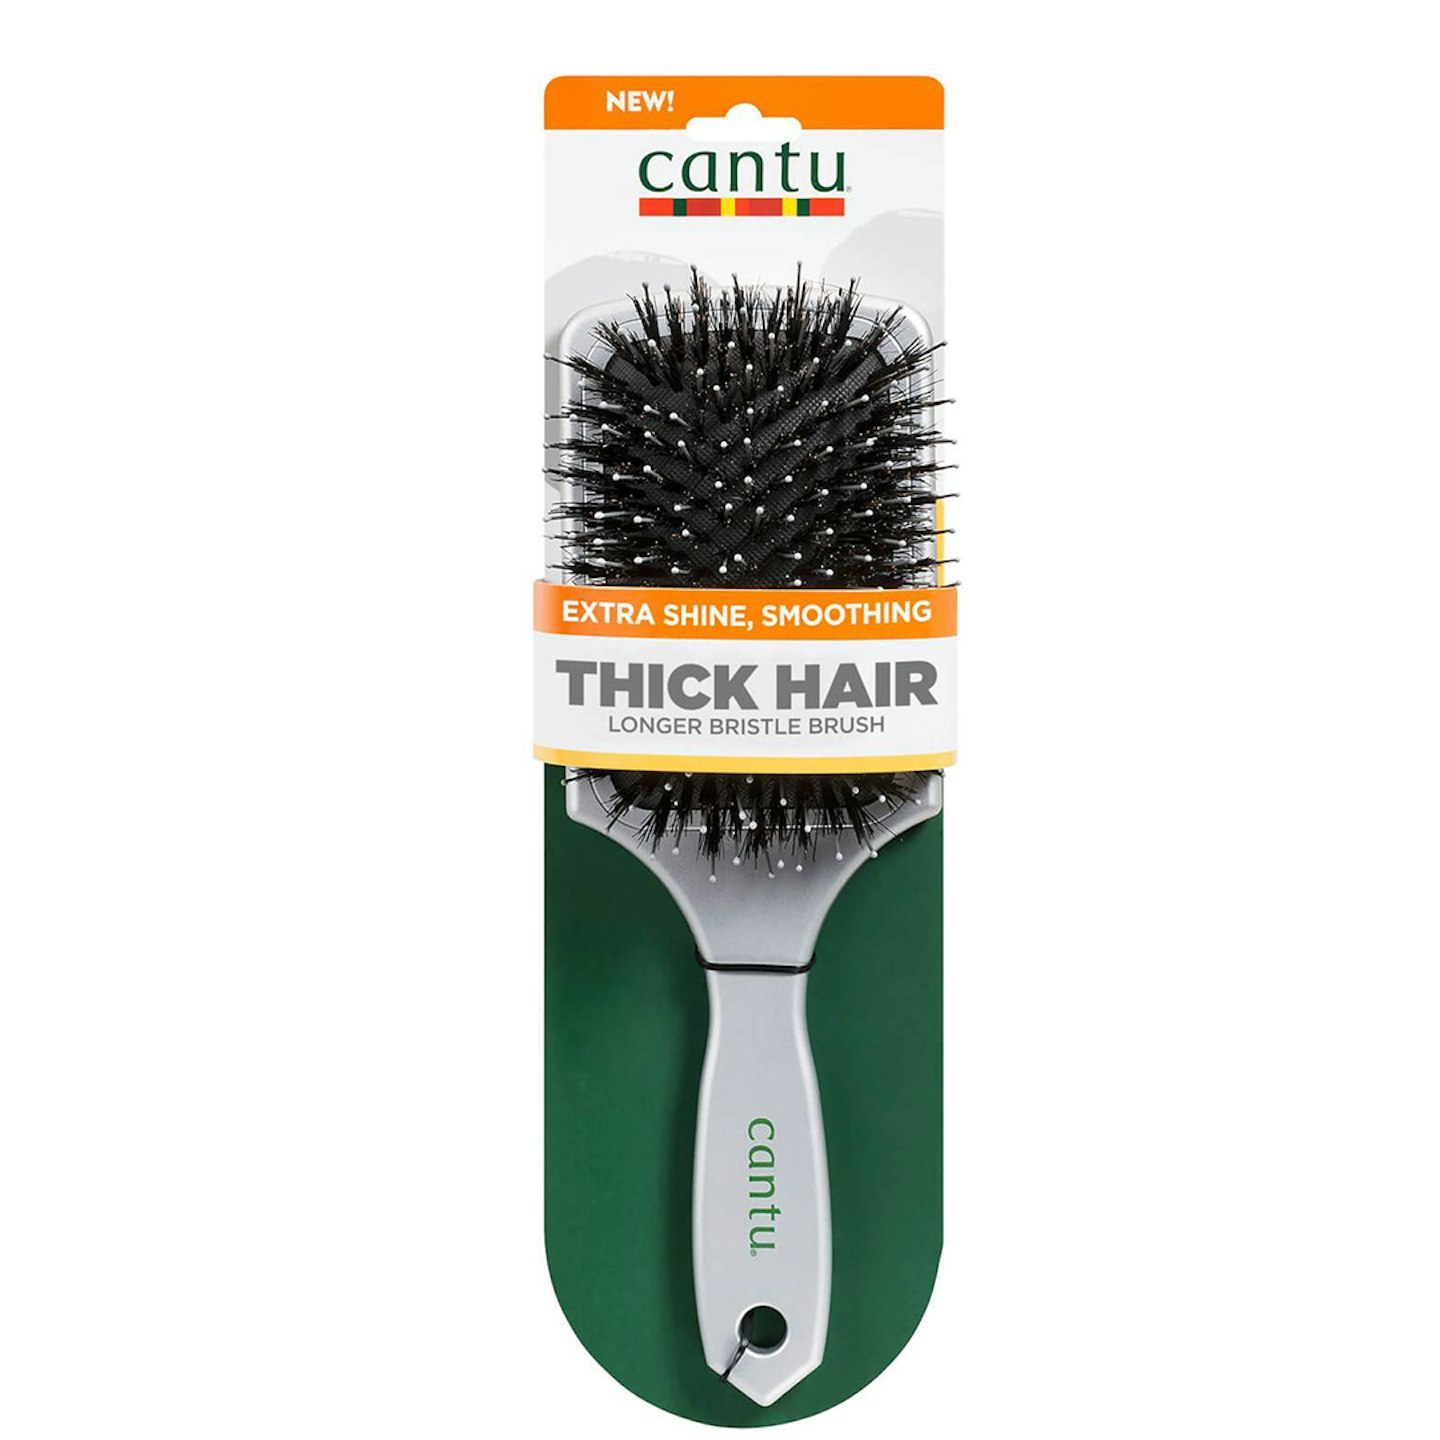 Best hair brushes - Cantu thick boar paddle brush 